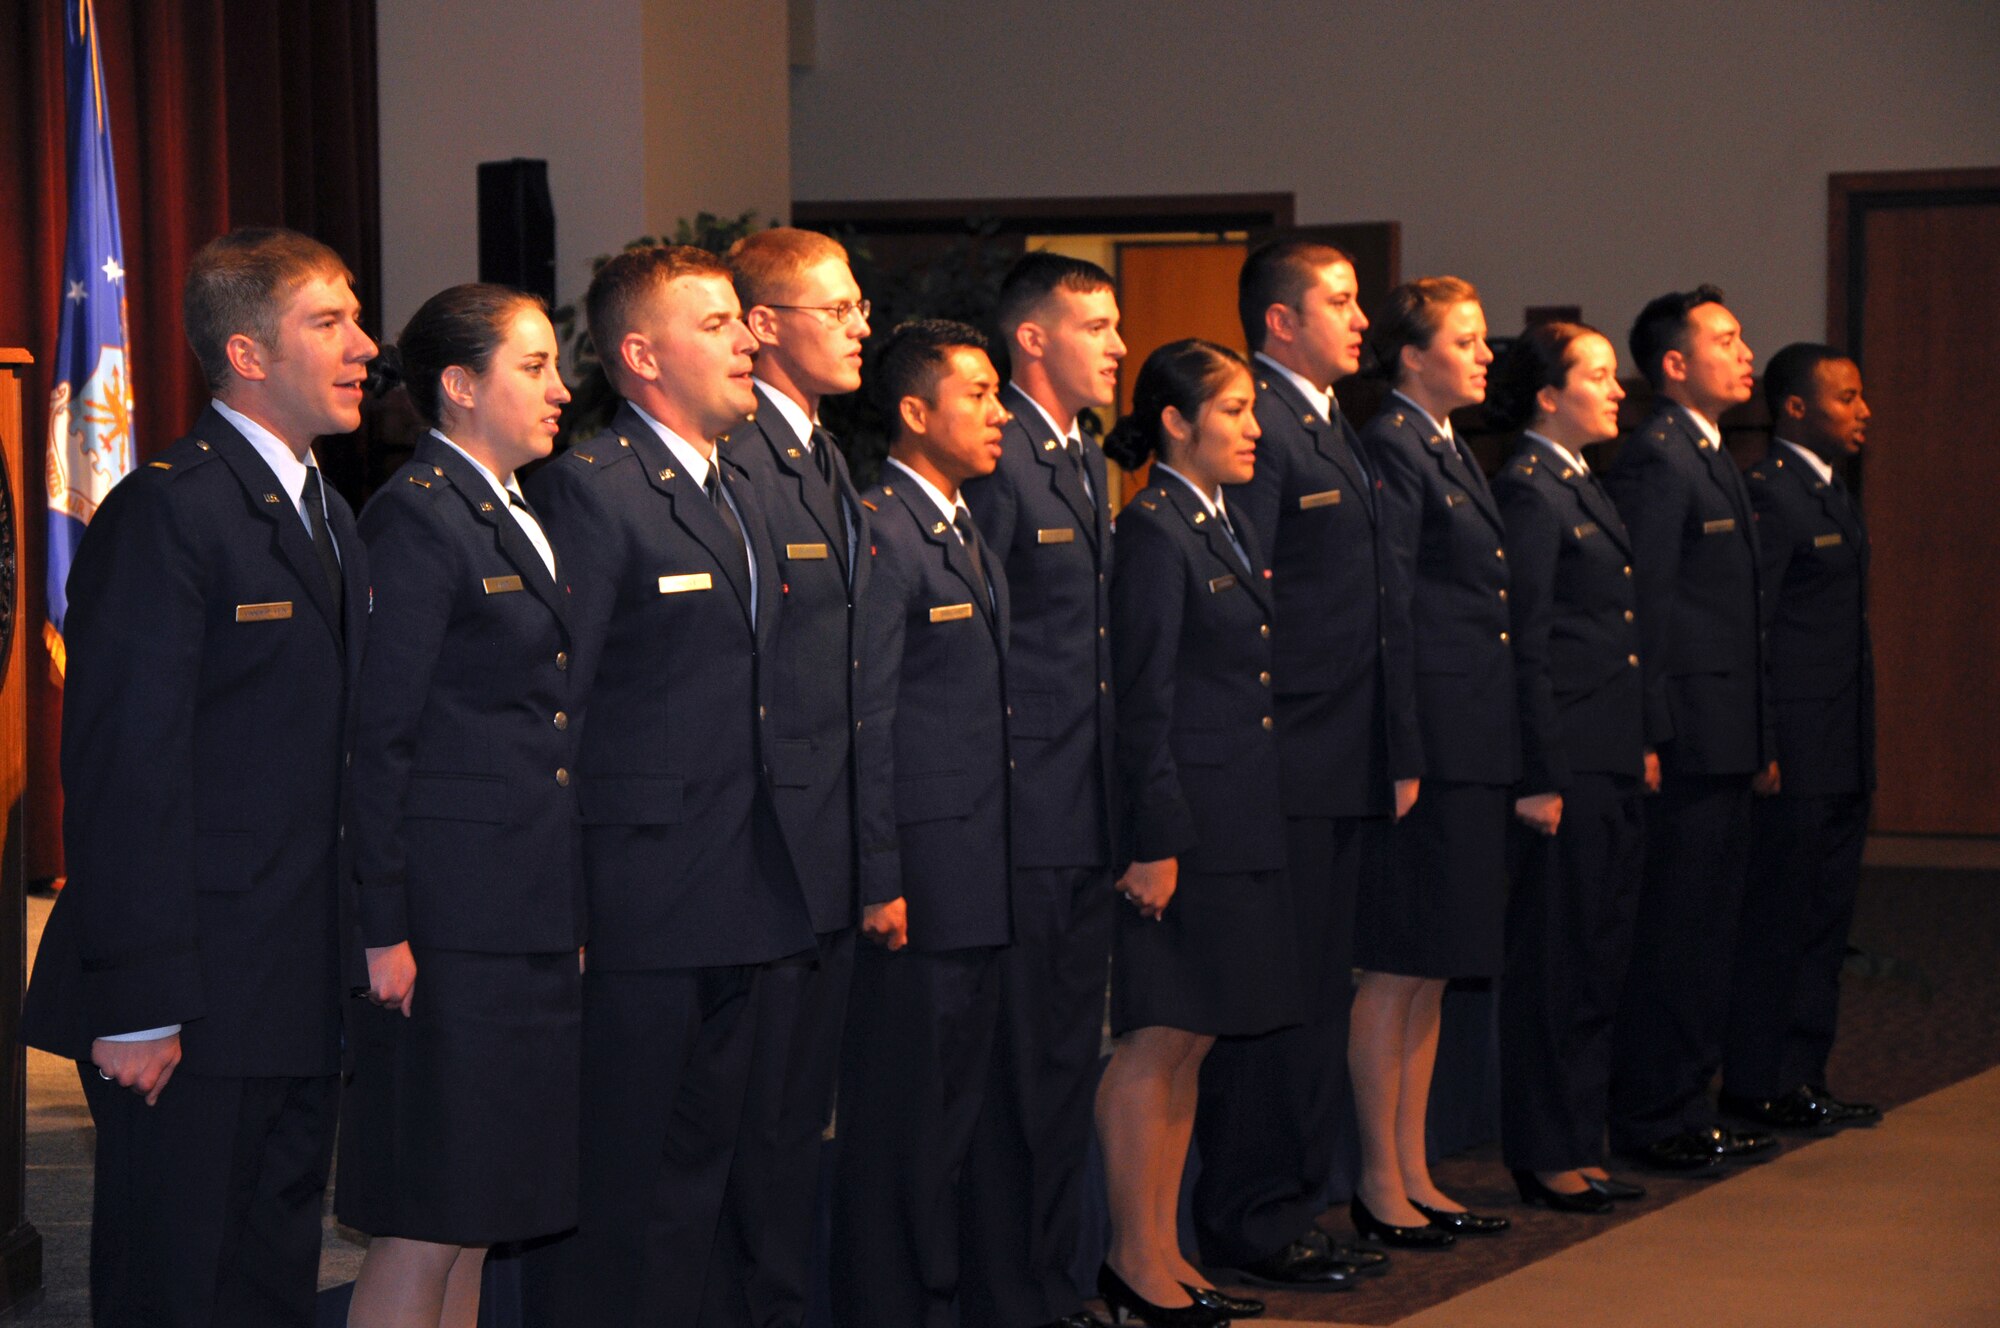 SAN ANGLEO, Texas – The 12 new second lieutenants from Angelo State University’s Air Force ROTC Detachment 847 sing the Air Force song during a ROTC commissioning ceremony at the ASU Houston Harte University Center here, May 10. These lieutenants will fill air battle, combat systems, combat missiles, logistics or pilot positions in the Air Force. (U.S. Air Force photo/ Airman 1st Class Joshua Edwards)